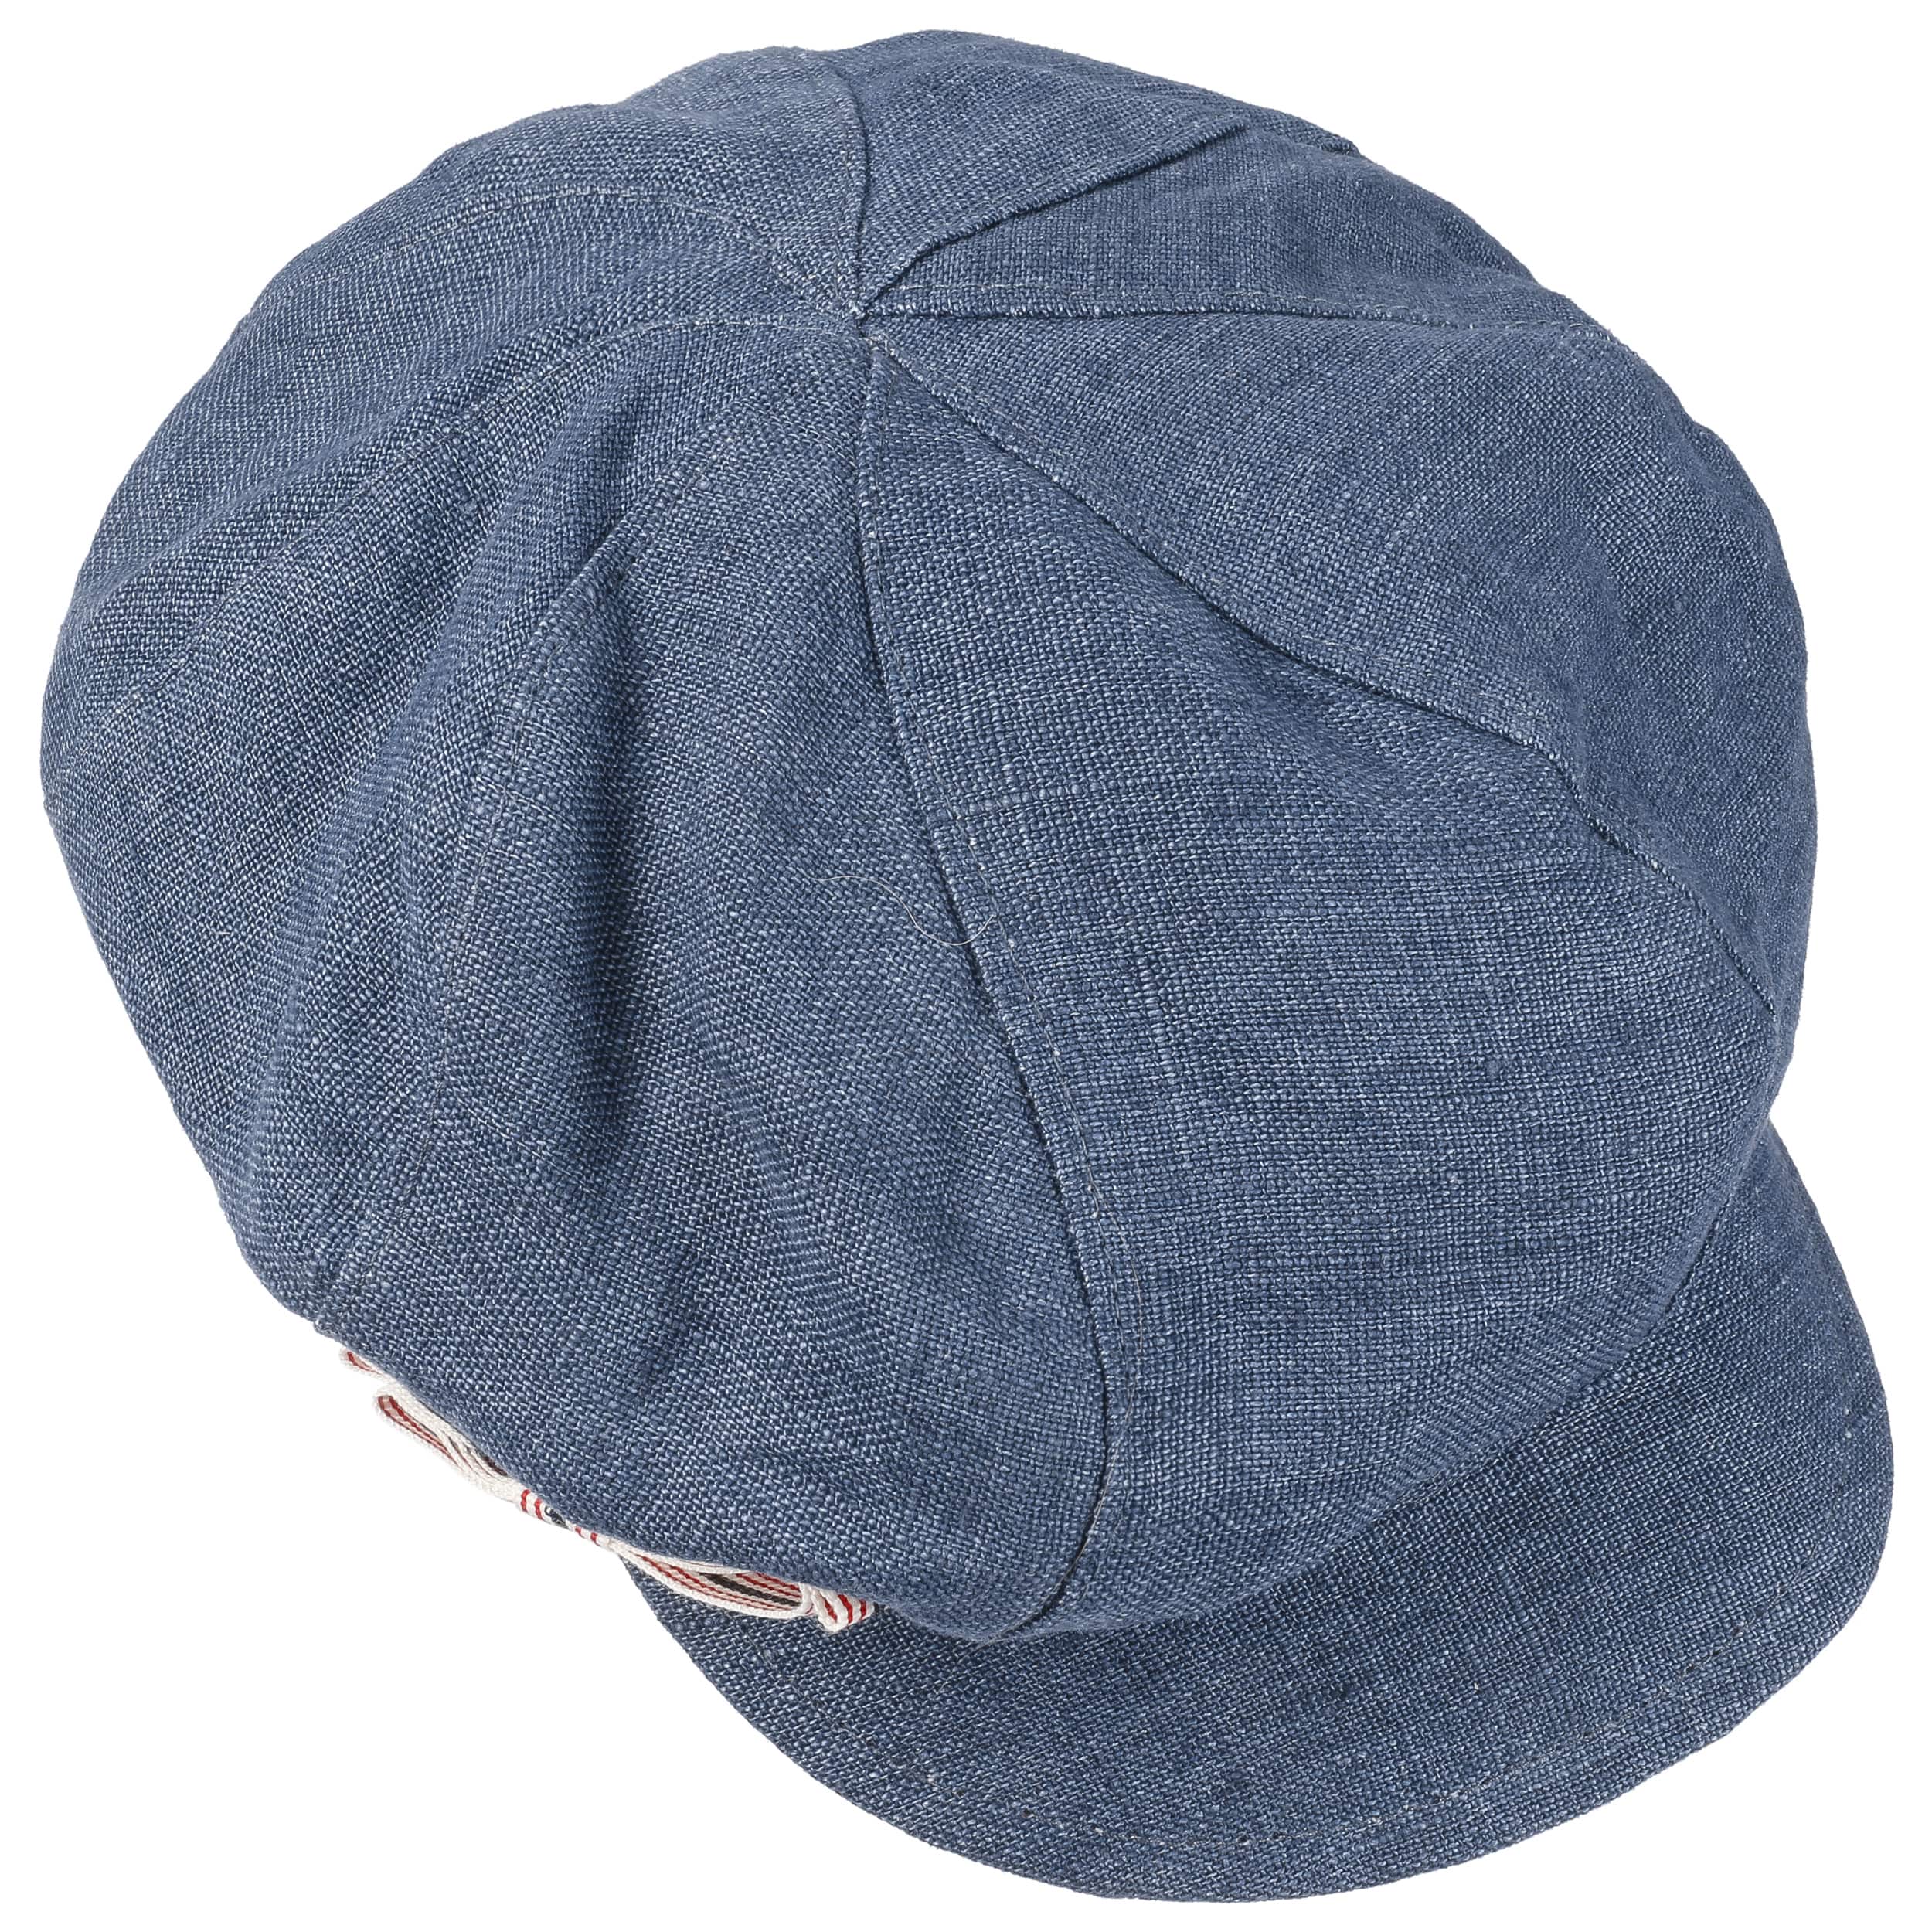 Linen Newsboy Cap with Loop by bedacht - 93,95